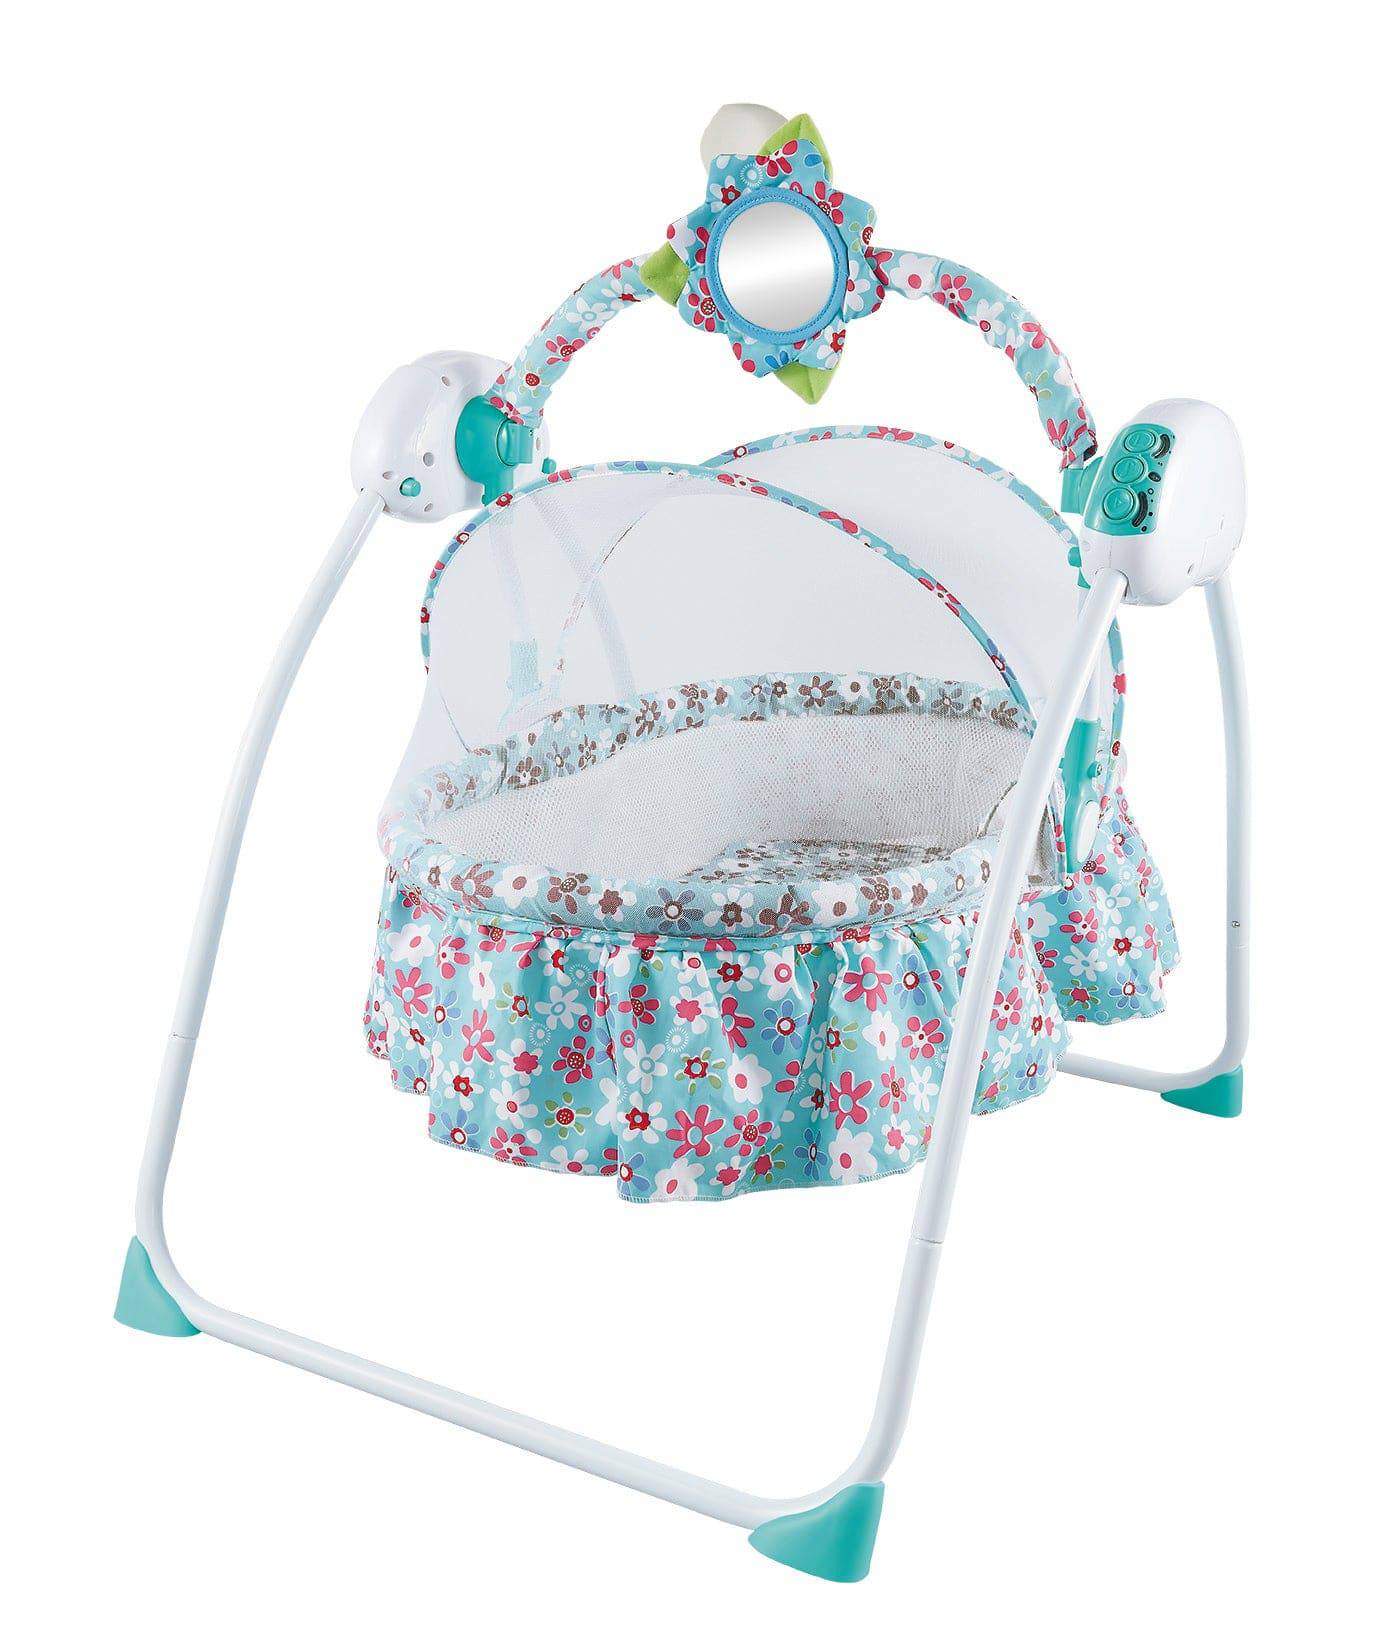 COOLBABY DY04B Blue Baby Cradle Multi-function Baby Rocking Chair For Children Swing Seat Toy - COOL BABY